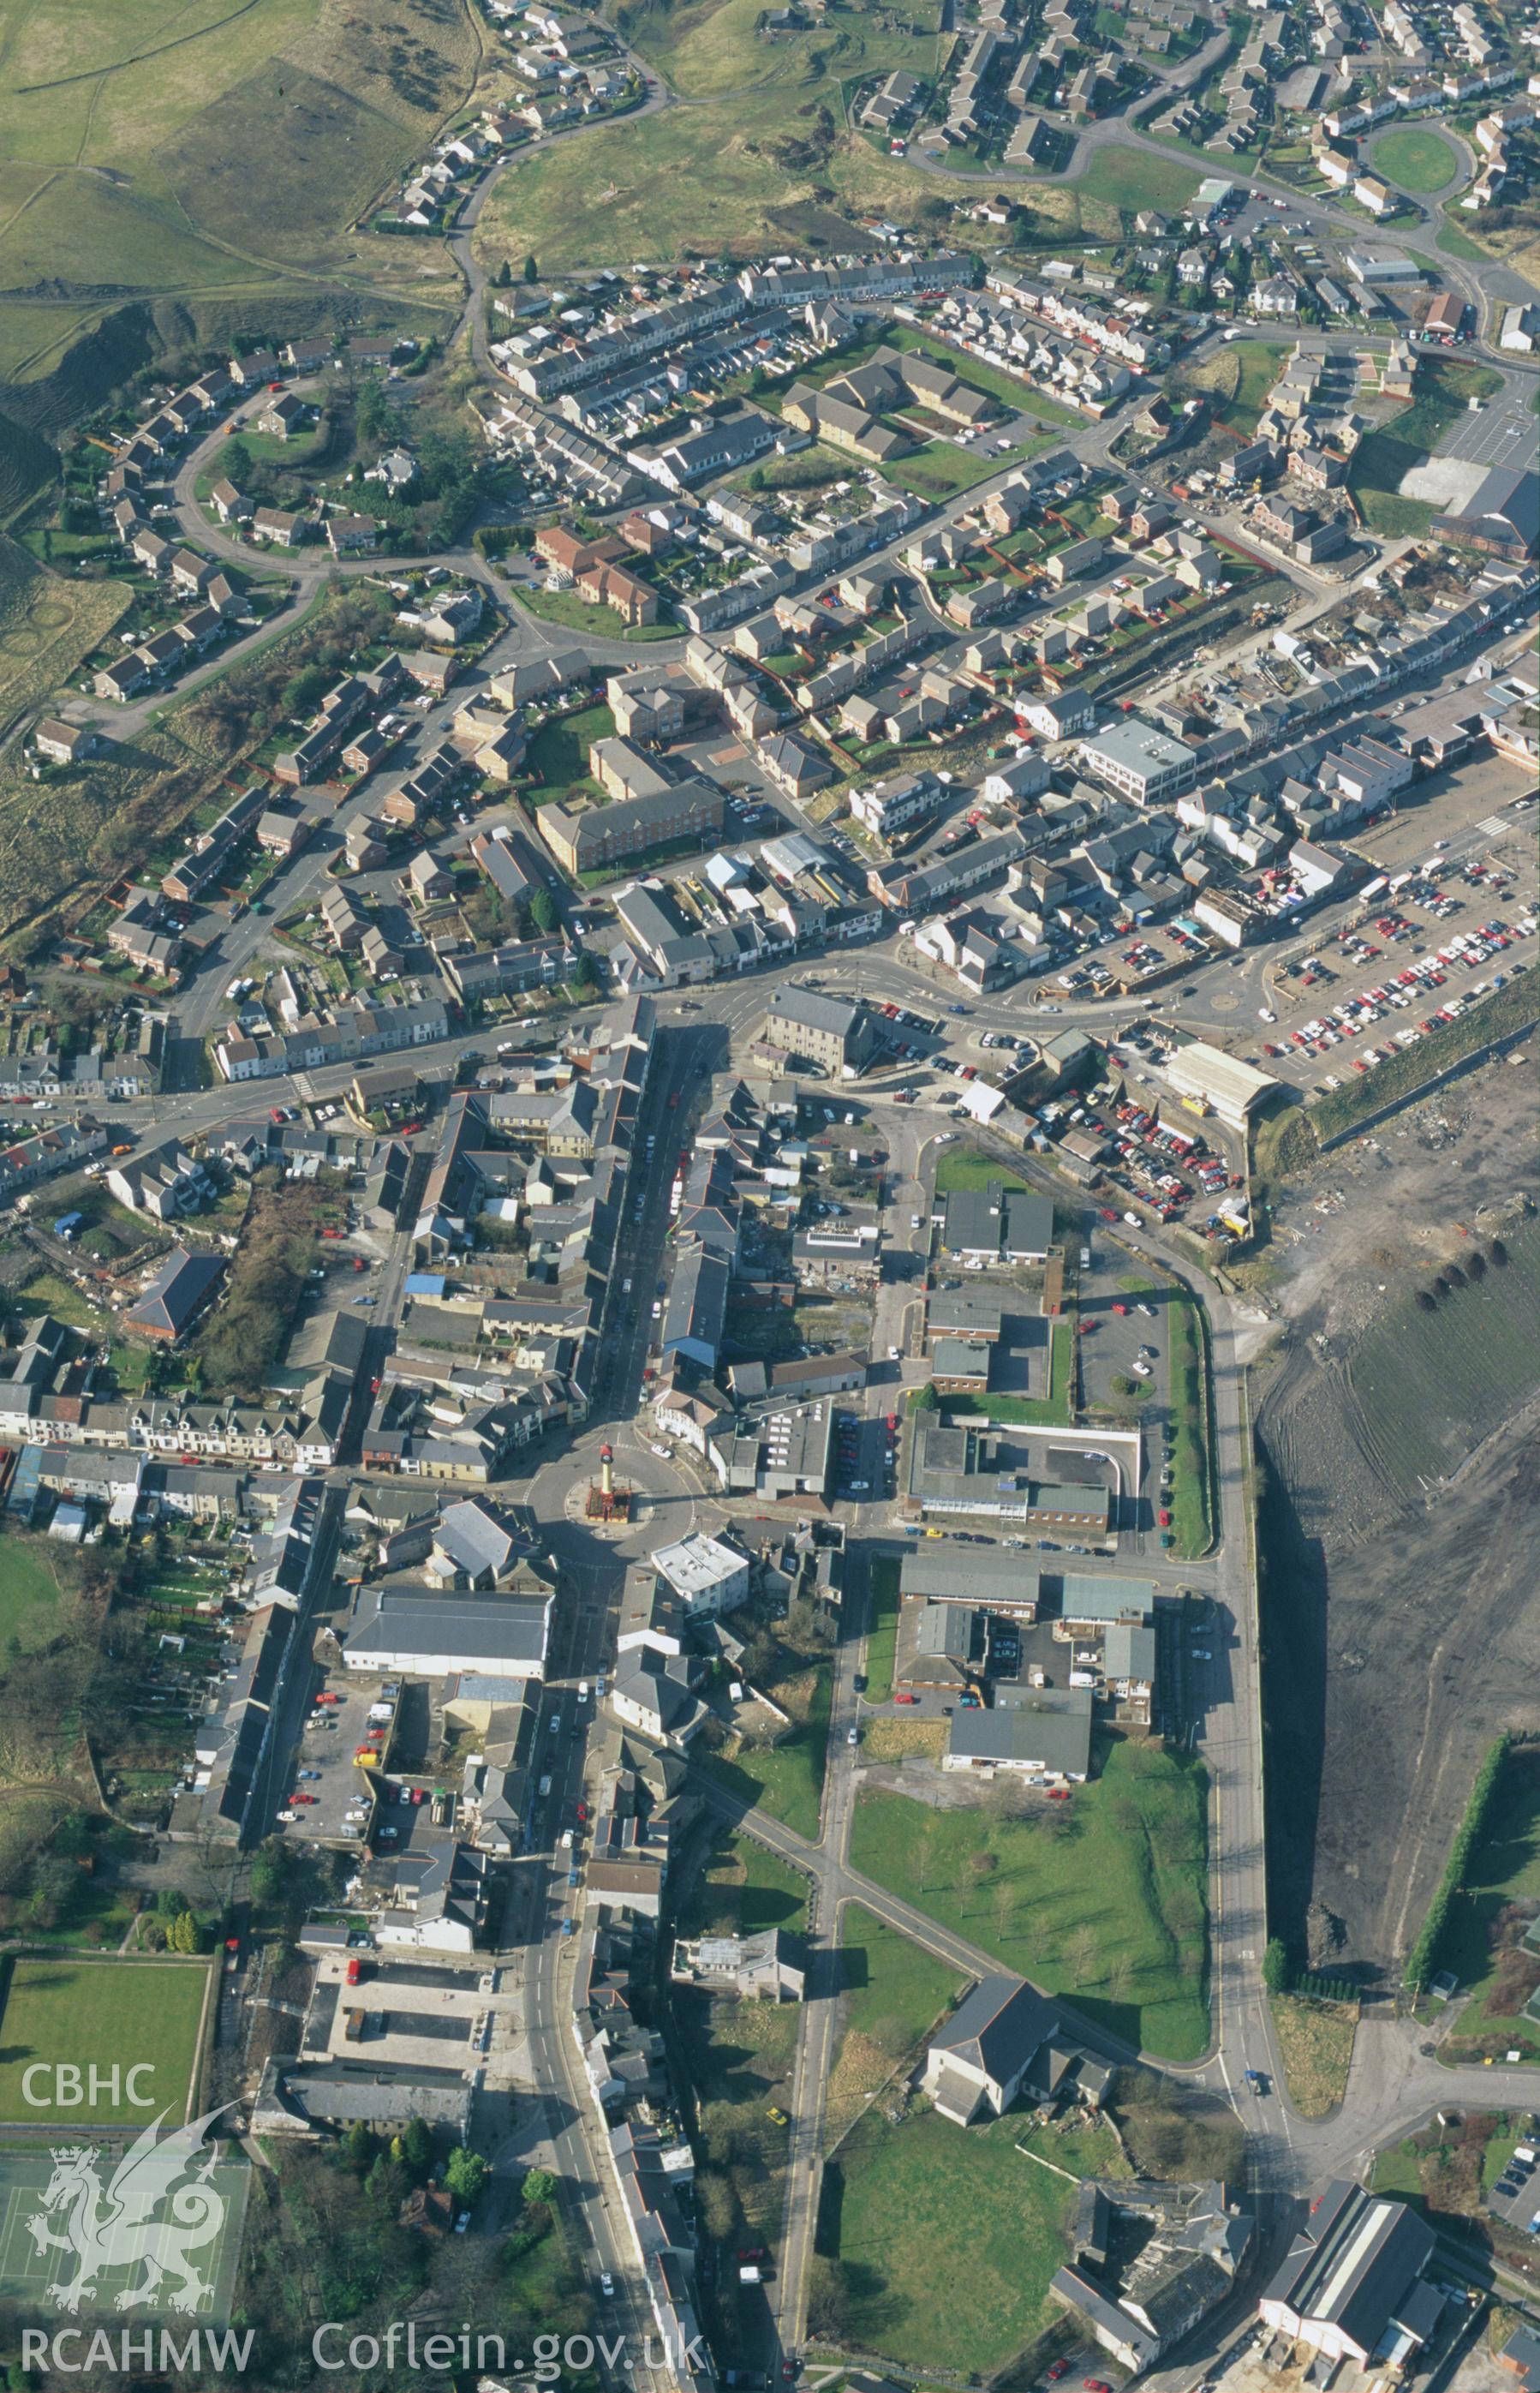 Slide of RCAHMW colour oblique aerial photograph of Tredegar, taken by T.G. Driver, 15/3/1999.